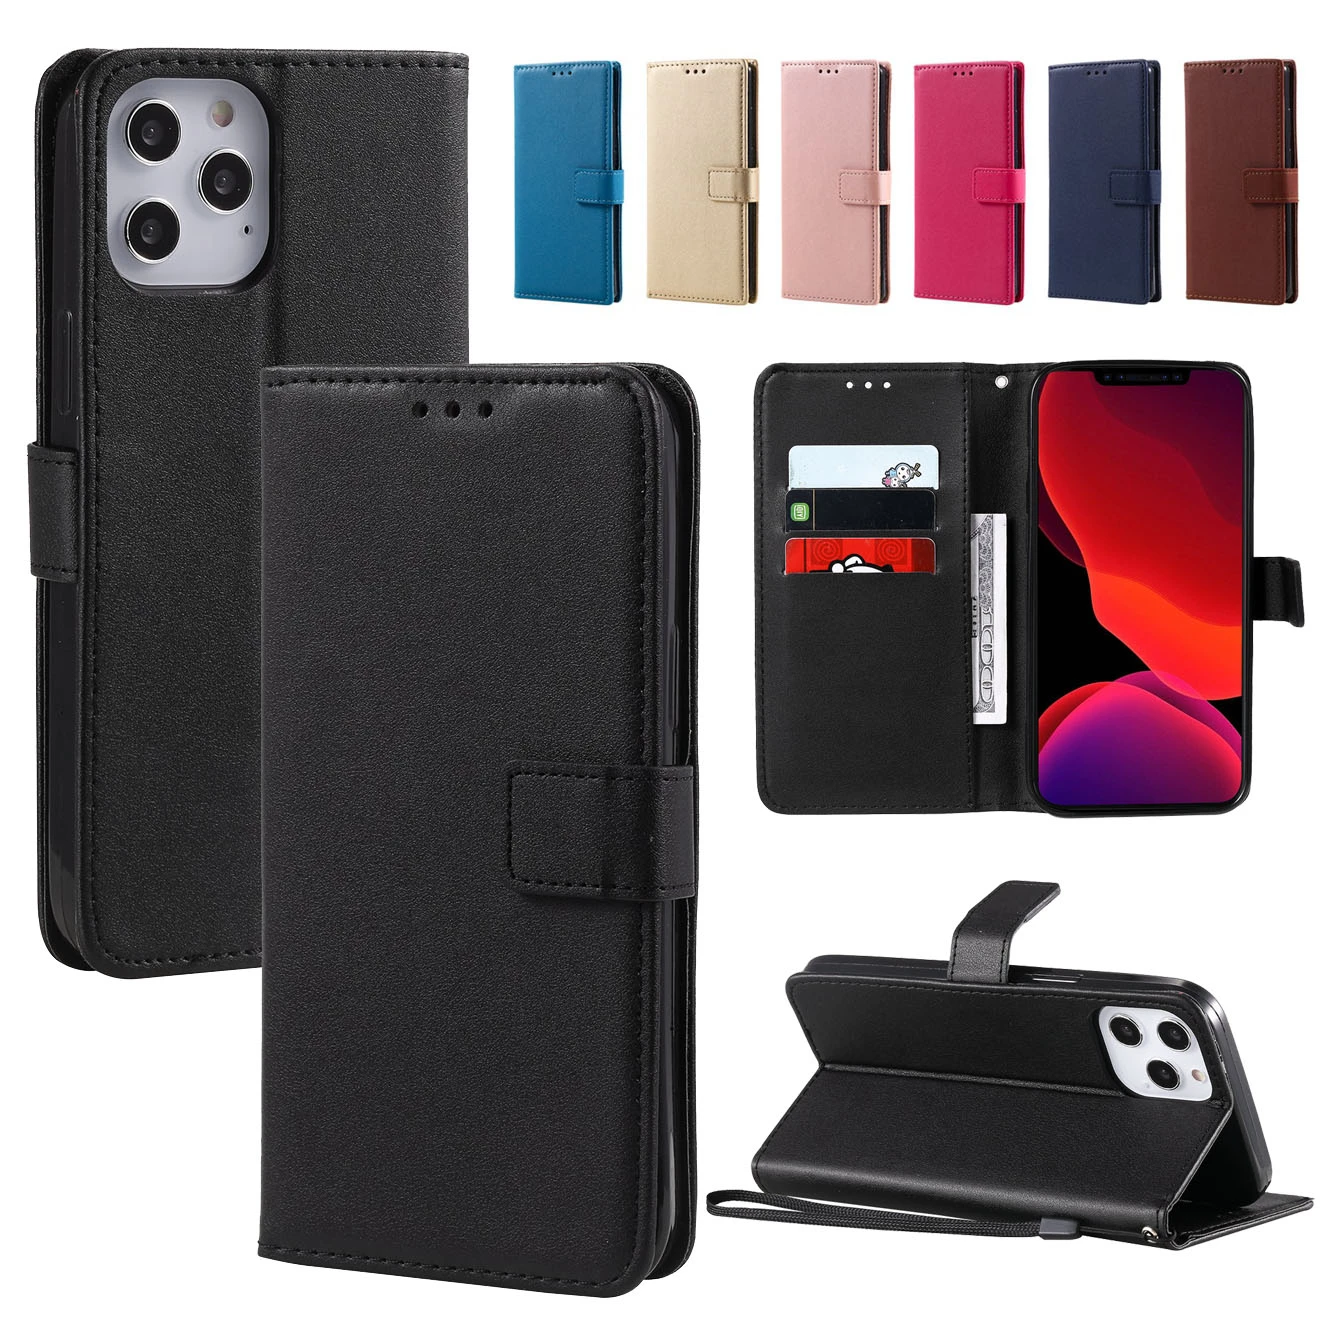 Solid Color Leather Wallet Case For POCO X3 NFC Xiaomi Redmi Note 4 5 6 7 8 8T 9 9S 9A 9C Pro 7A 8A A3 10 Card Slot Flip Cover